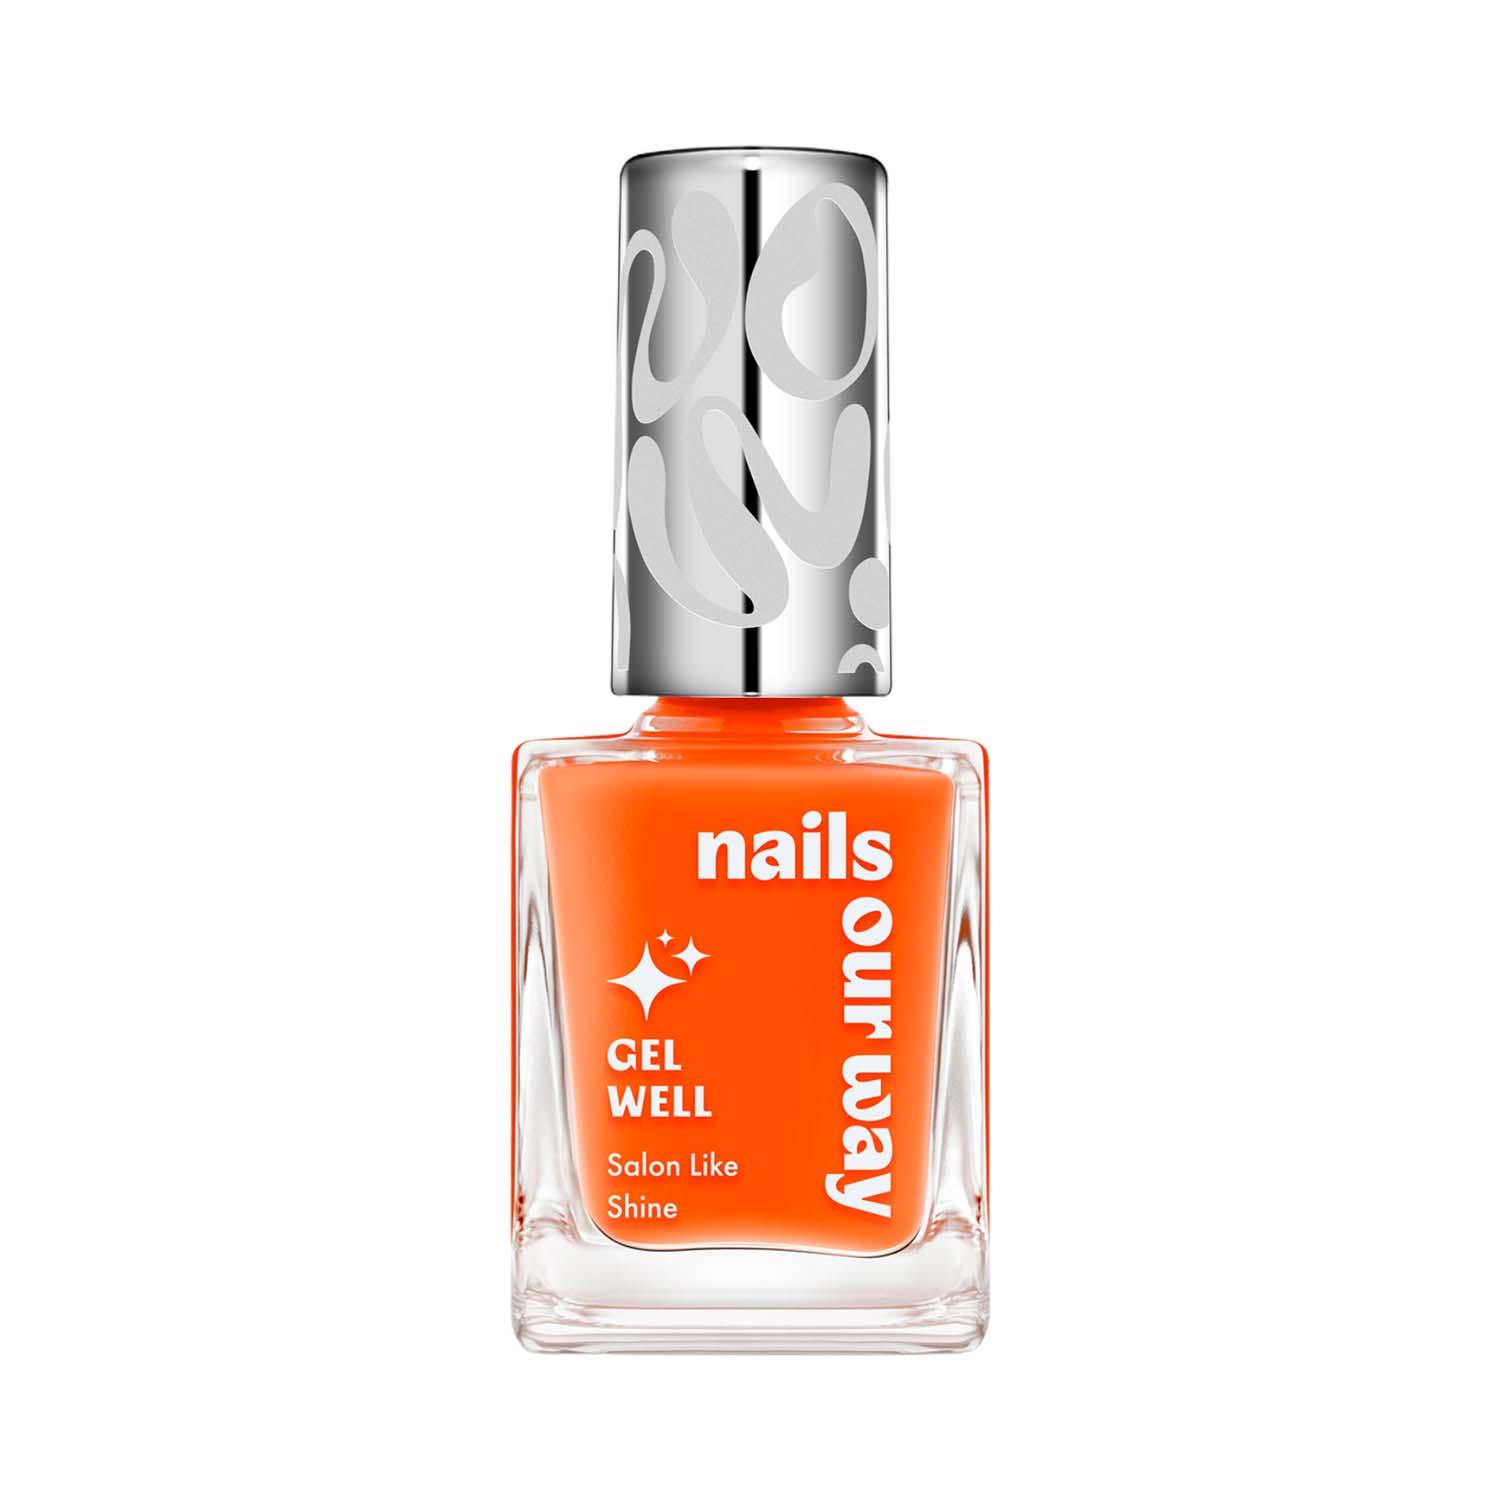 Nails Our Way | Nails Our Way Gel Well Nail Enamel - 305 Curious (10 ml)